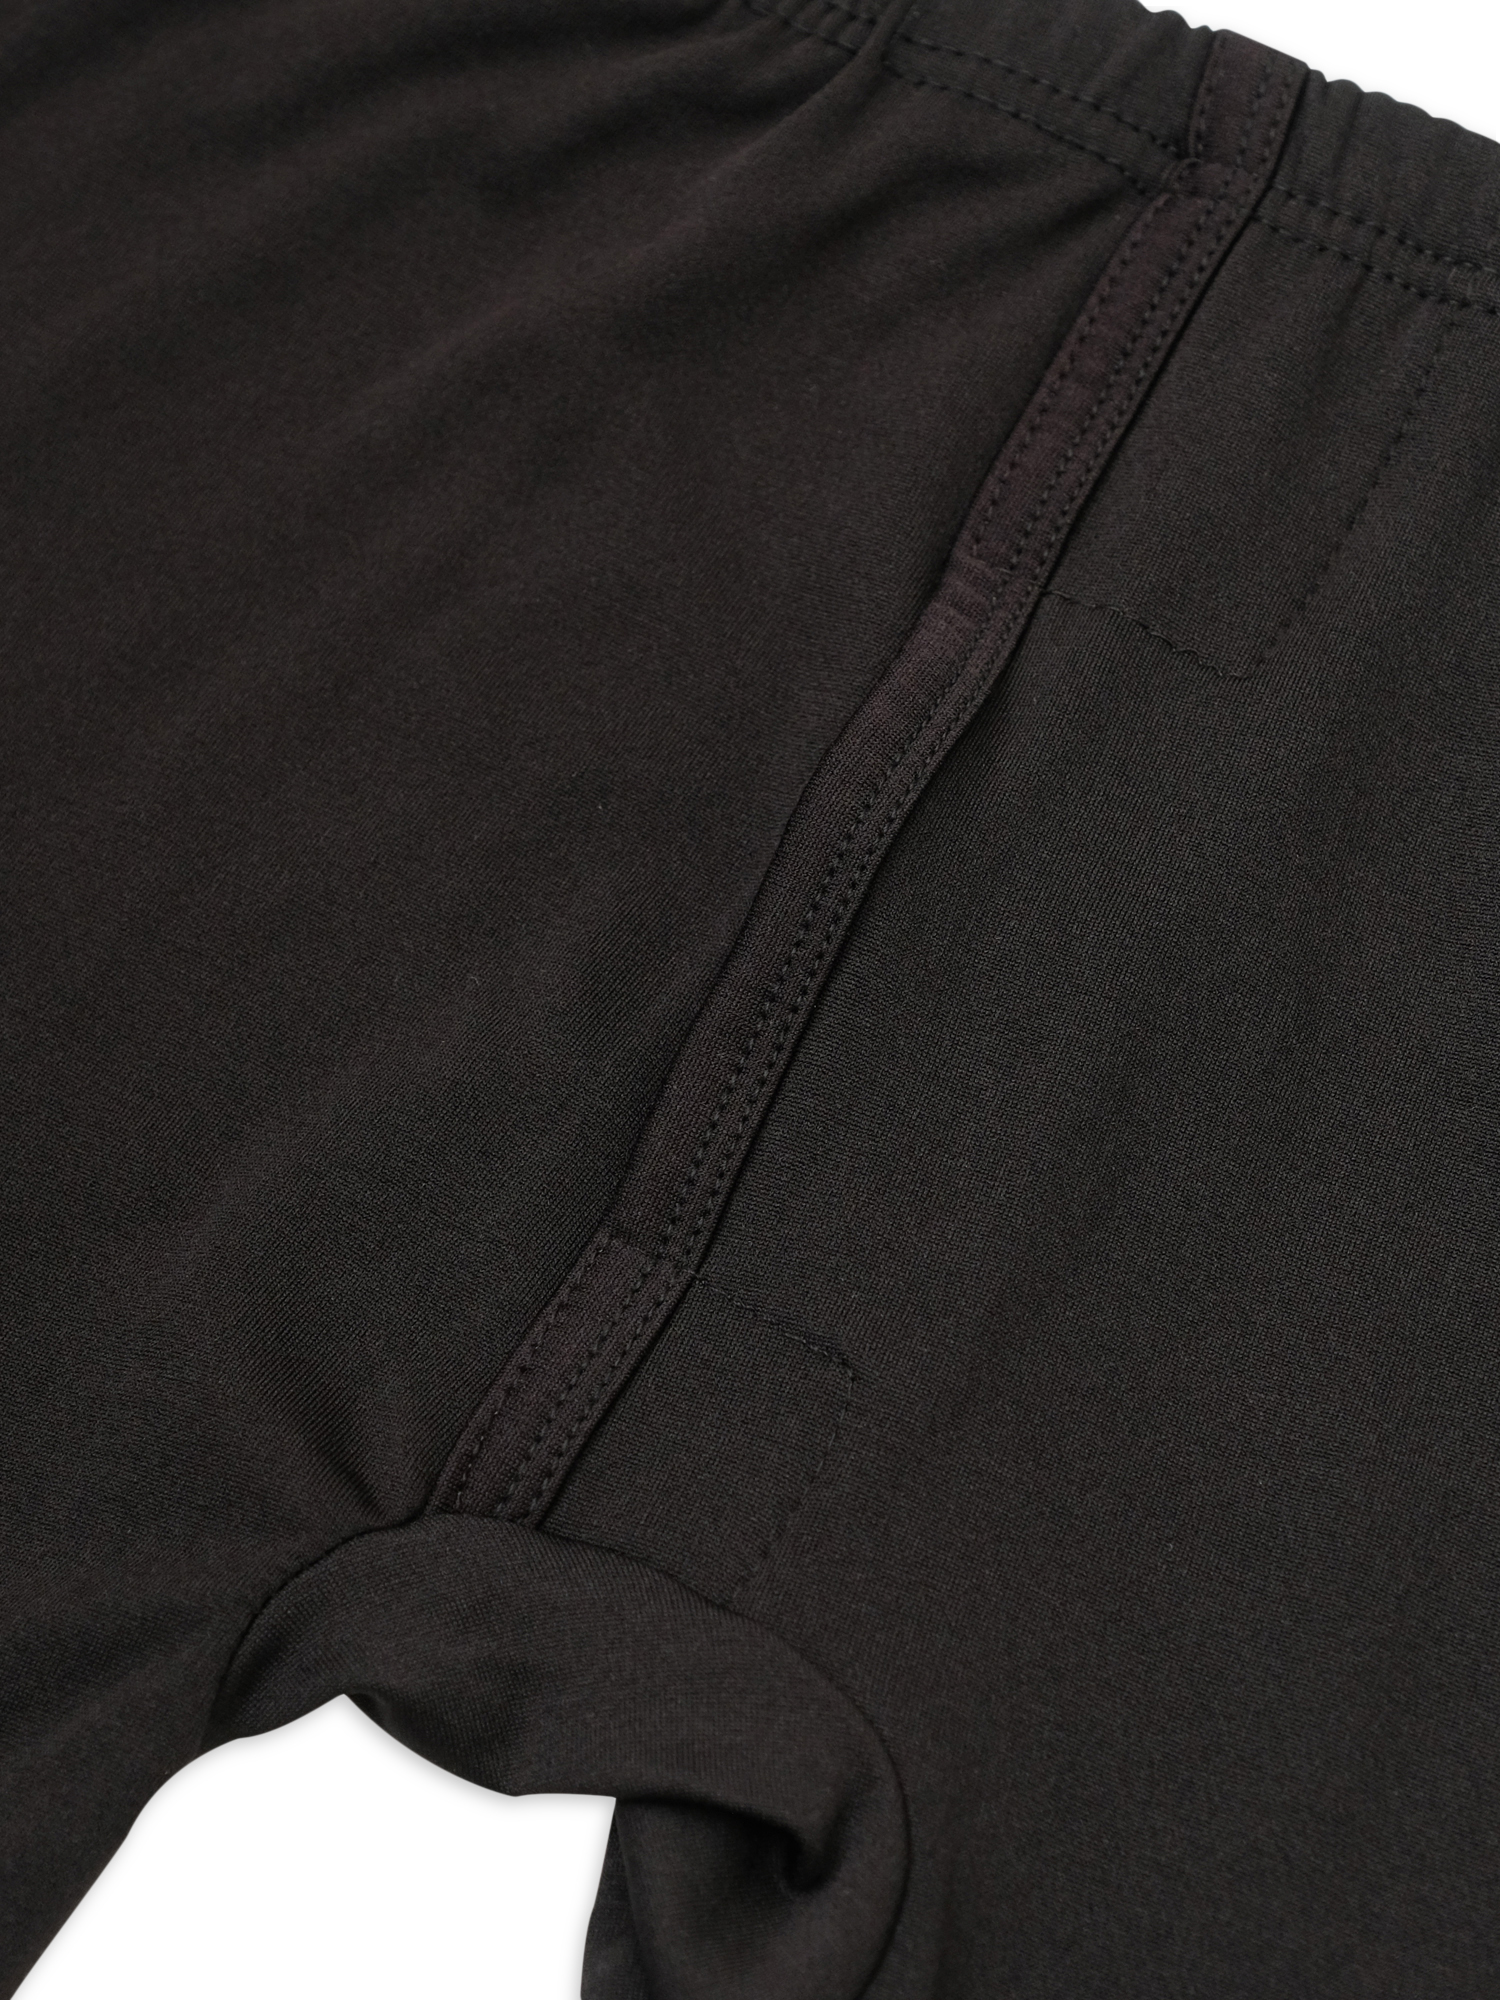 Real Essentials Boys Thermal Bottoms, 3 Pack Fleece Lined Thermal Pants Sizes S (6-7) - XL (16-18) - image 4 of 5